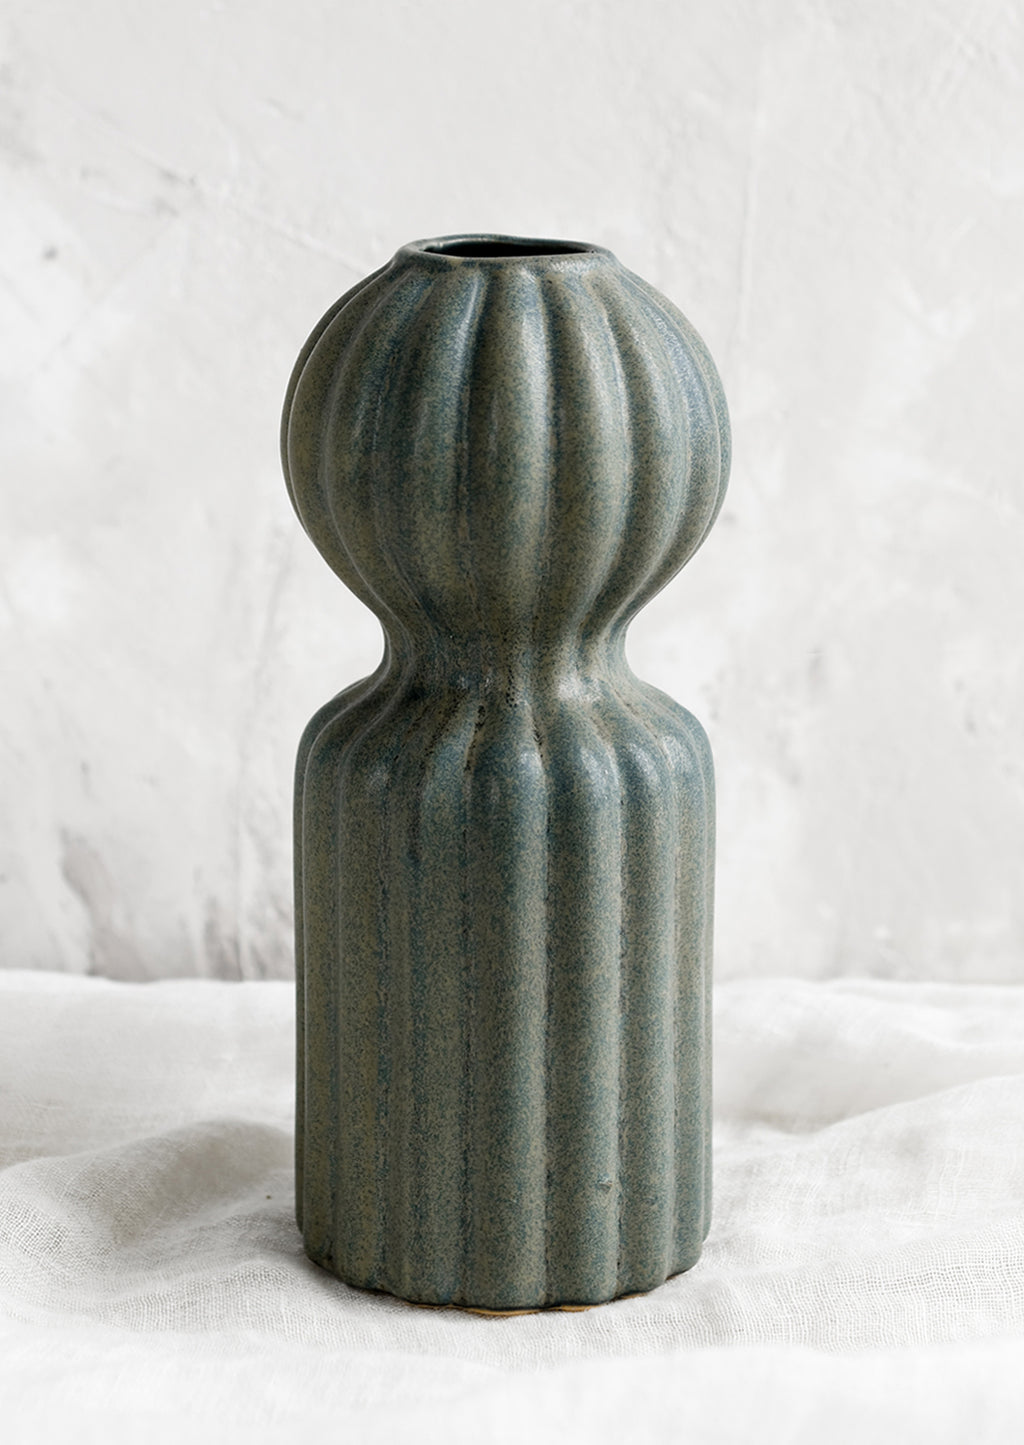 1: A curvy ceramic vase in teal glaze with ball-shaped top.